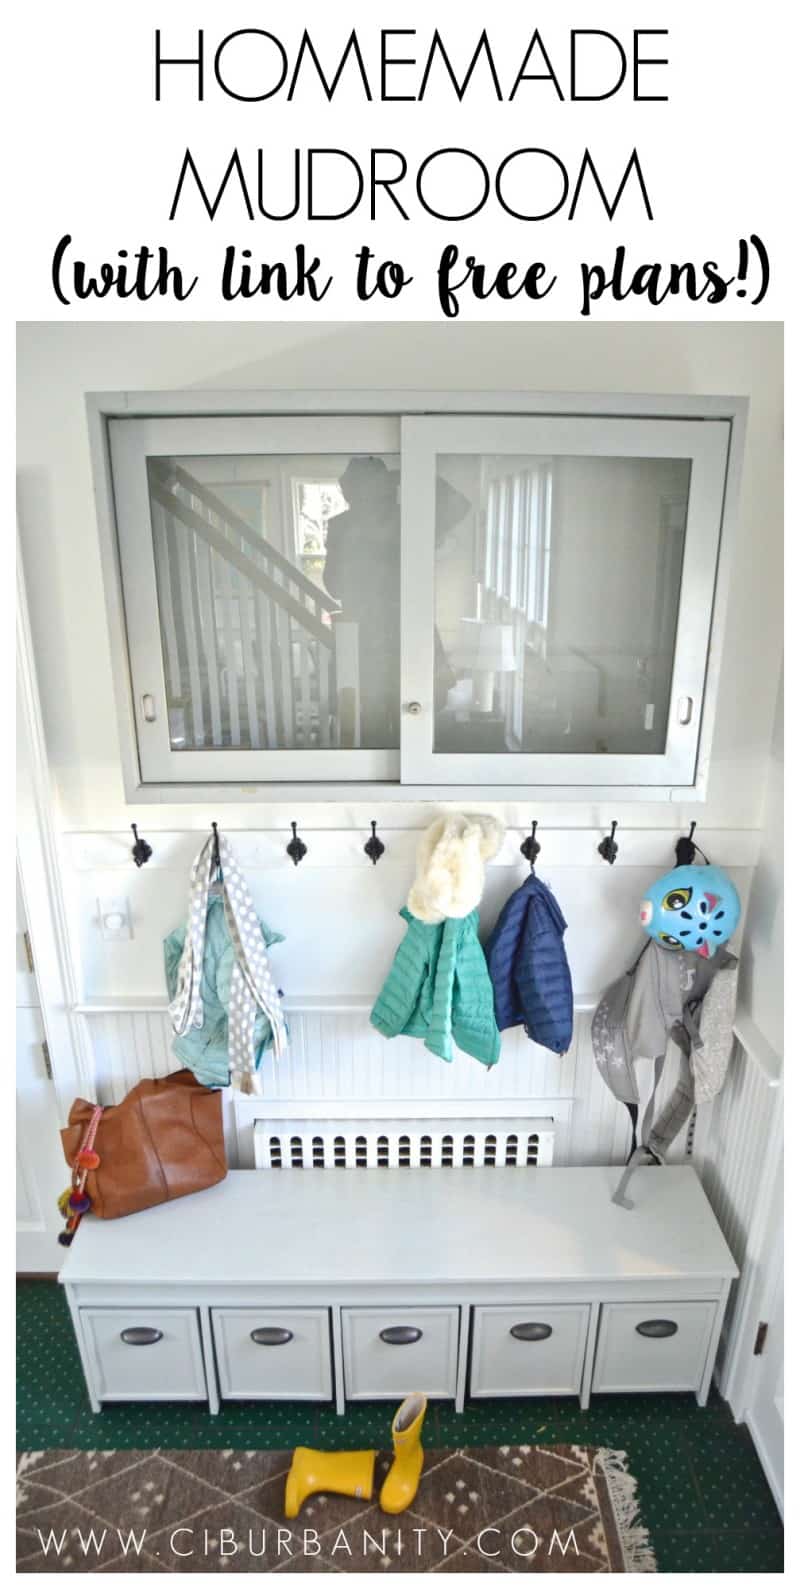 Homemade mudroom with free plans